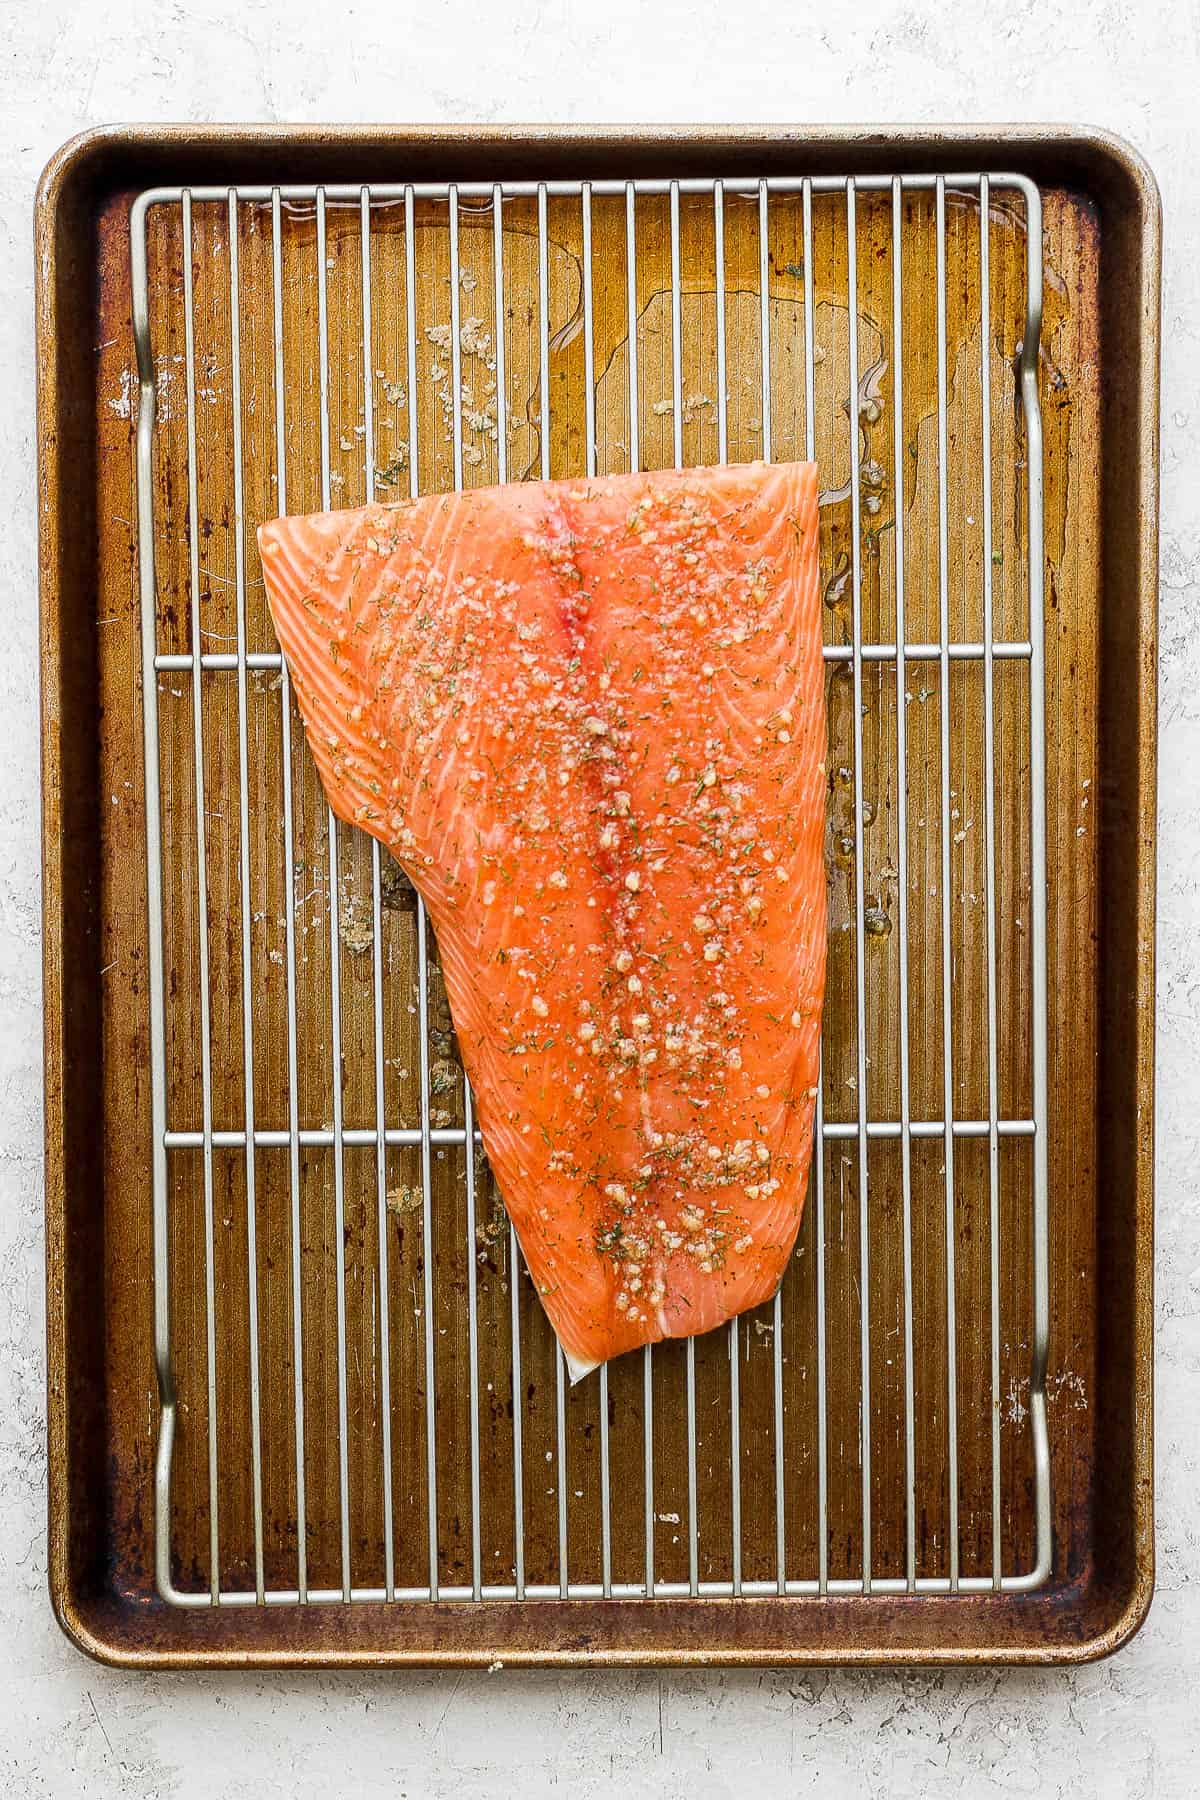 Salmon fillet dry brining on a wire rack.